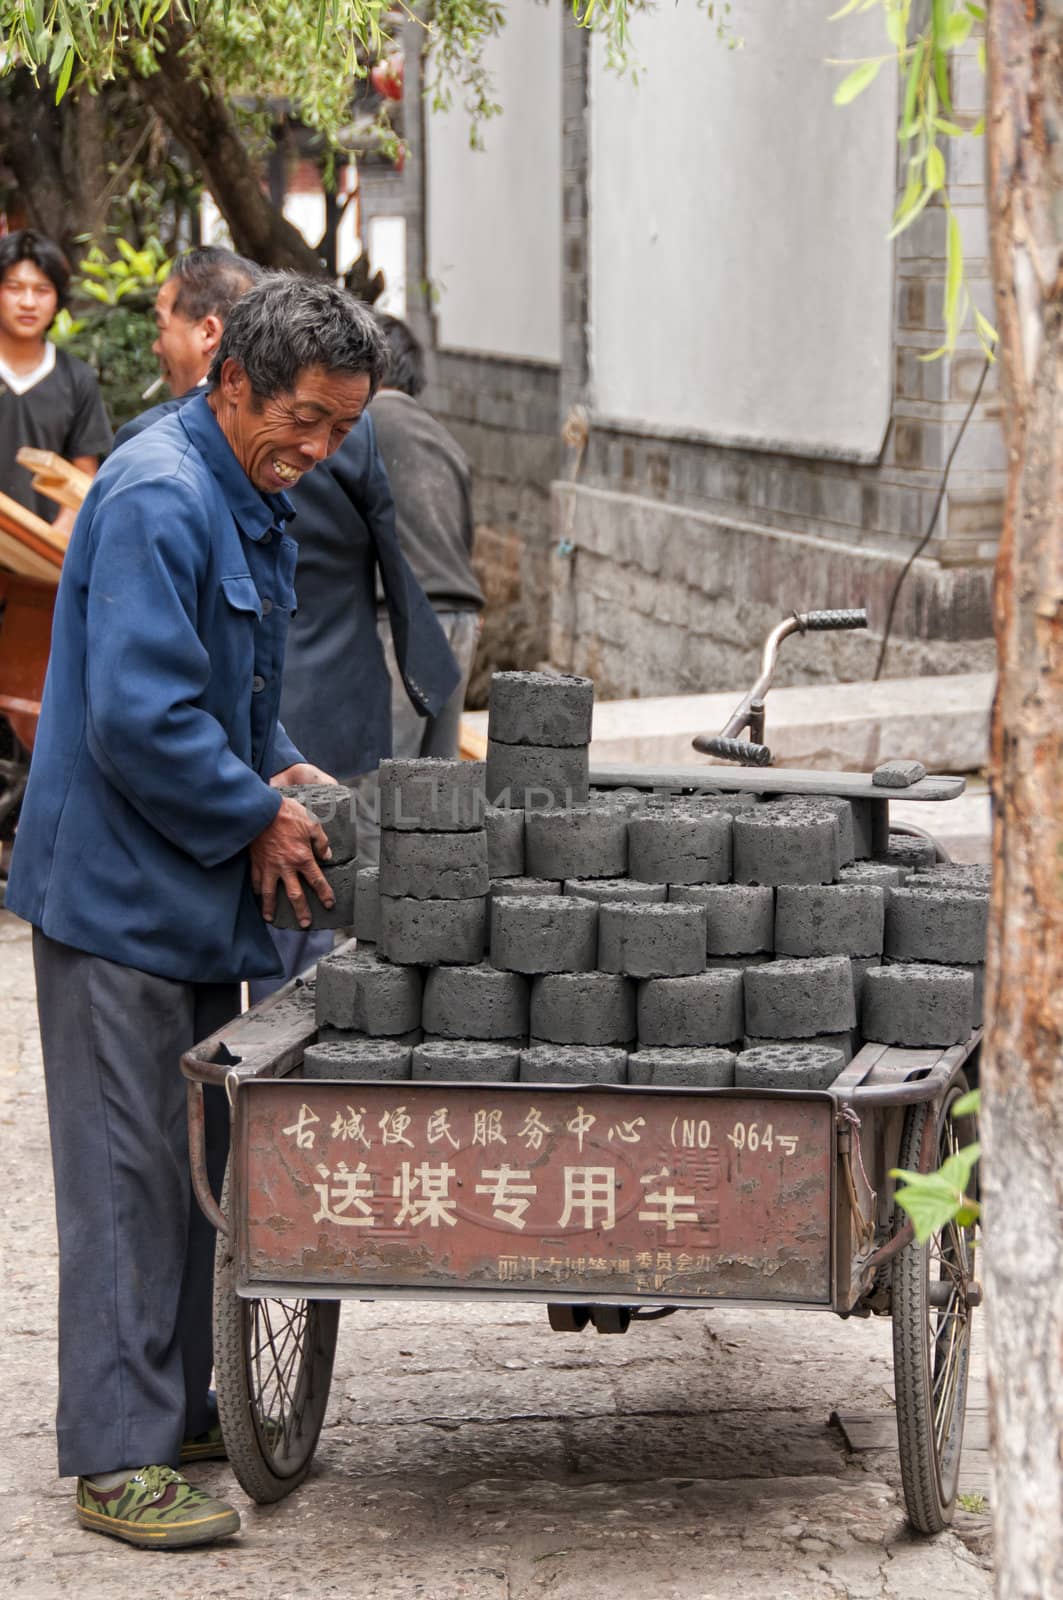 Unidentified Man delivering Coal in Lijiang, China, July 8 2010. The People's Republic of China is the largest consumer of coal in the world.